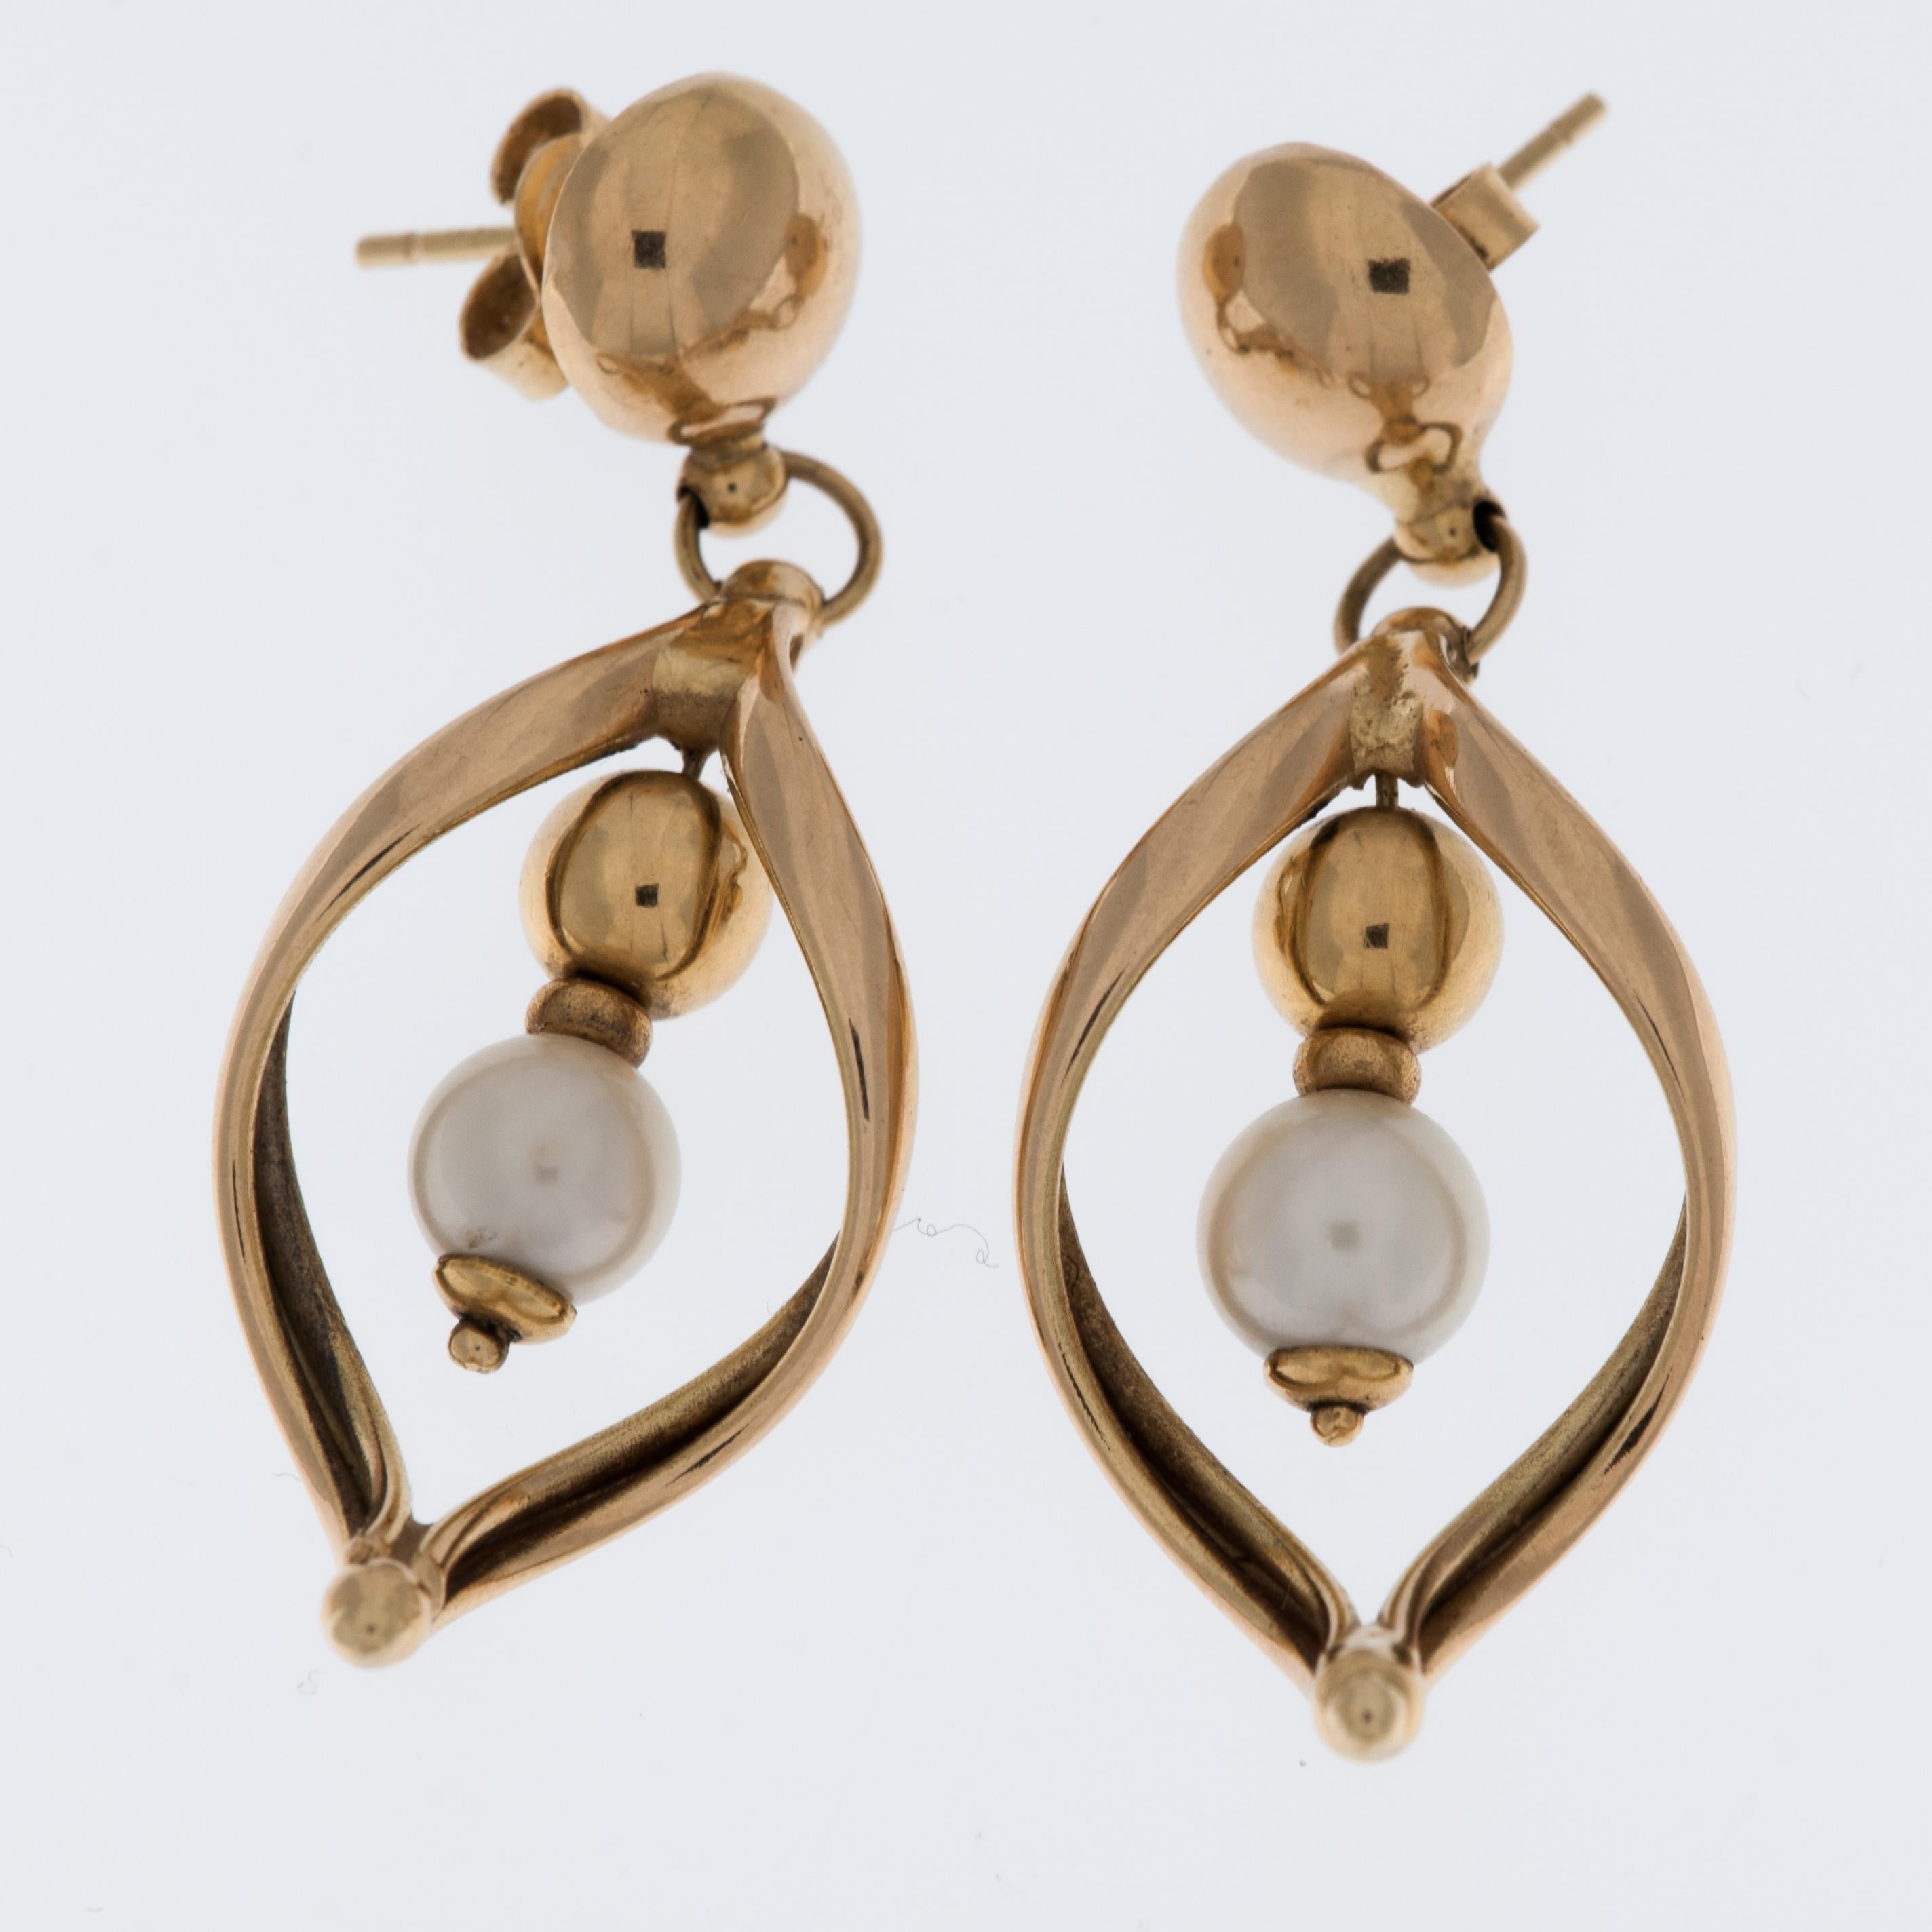 These Italian Vintage 18kt Yellow Gold Dangle Earrings are a stunning and timeless piece of jewelry. Crafted from high-quality 18-karat yellow gold, these earrings boast a rich and warm golden hue that adds a touch of luxury to any ensemble.

The